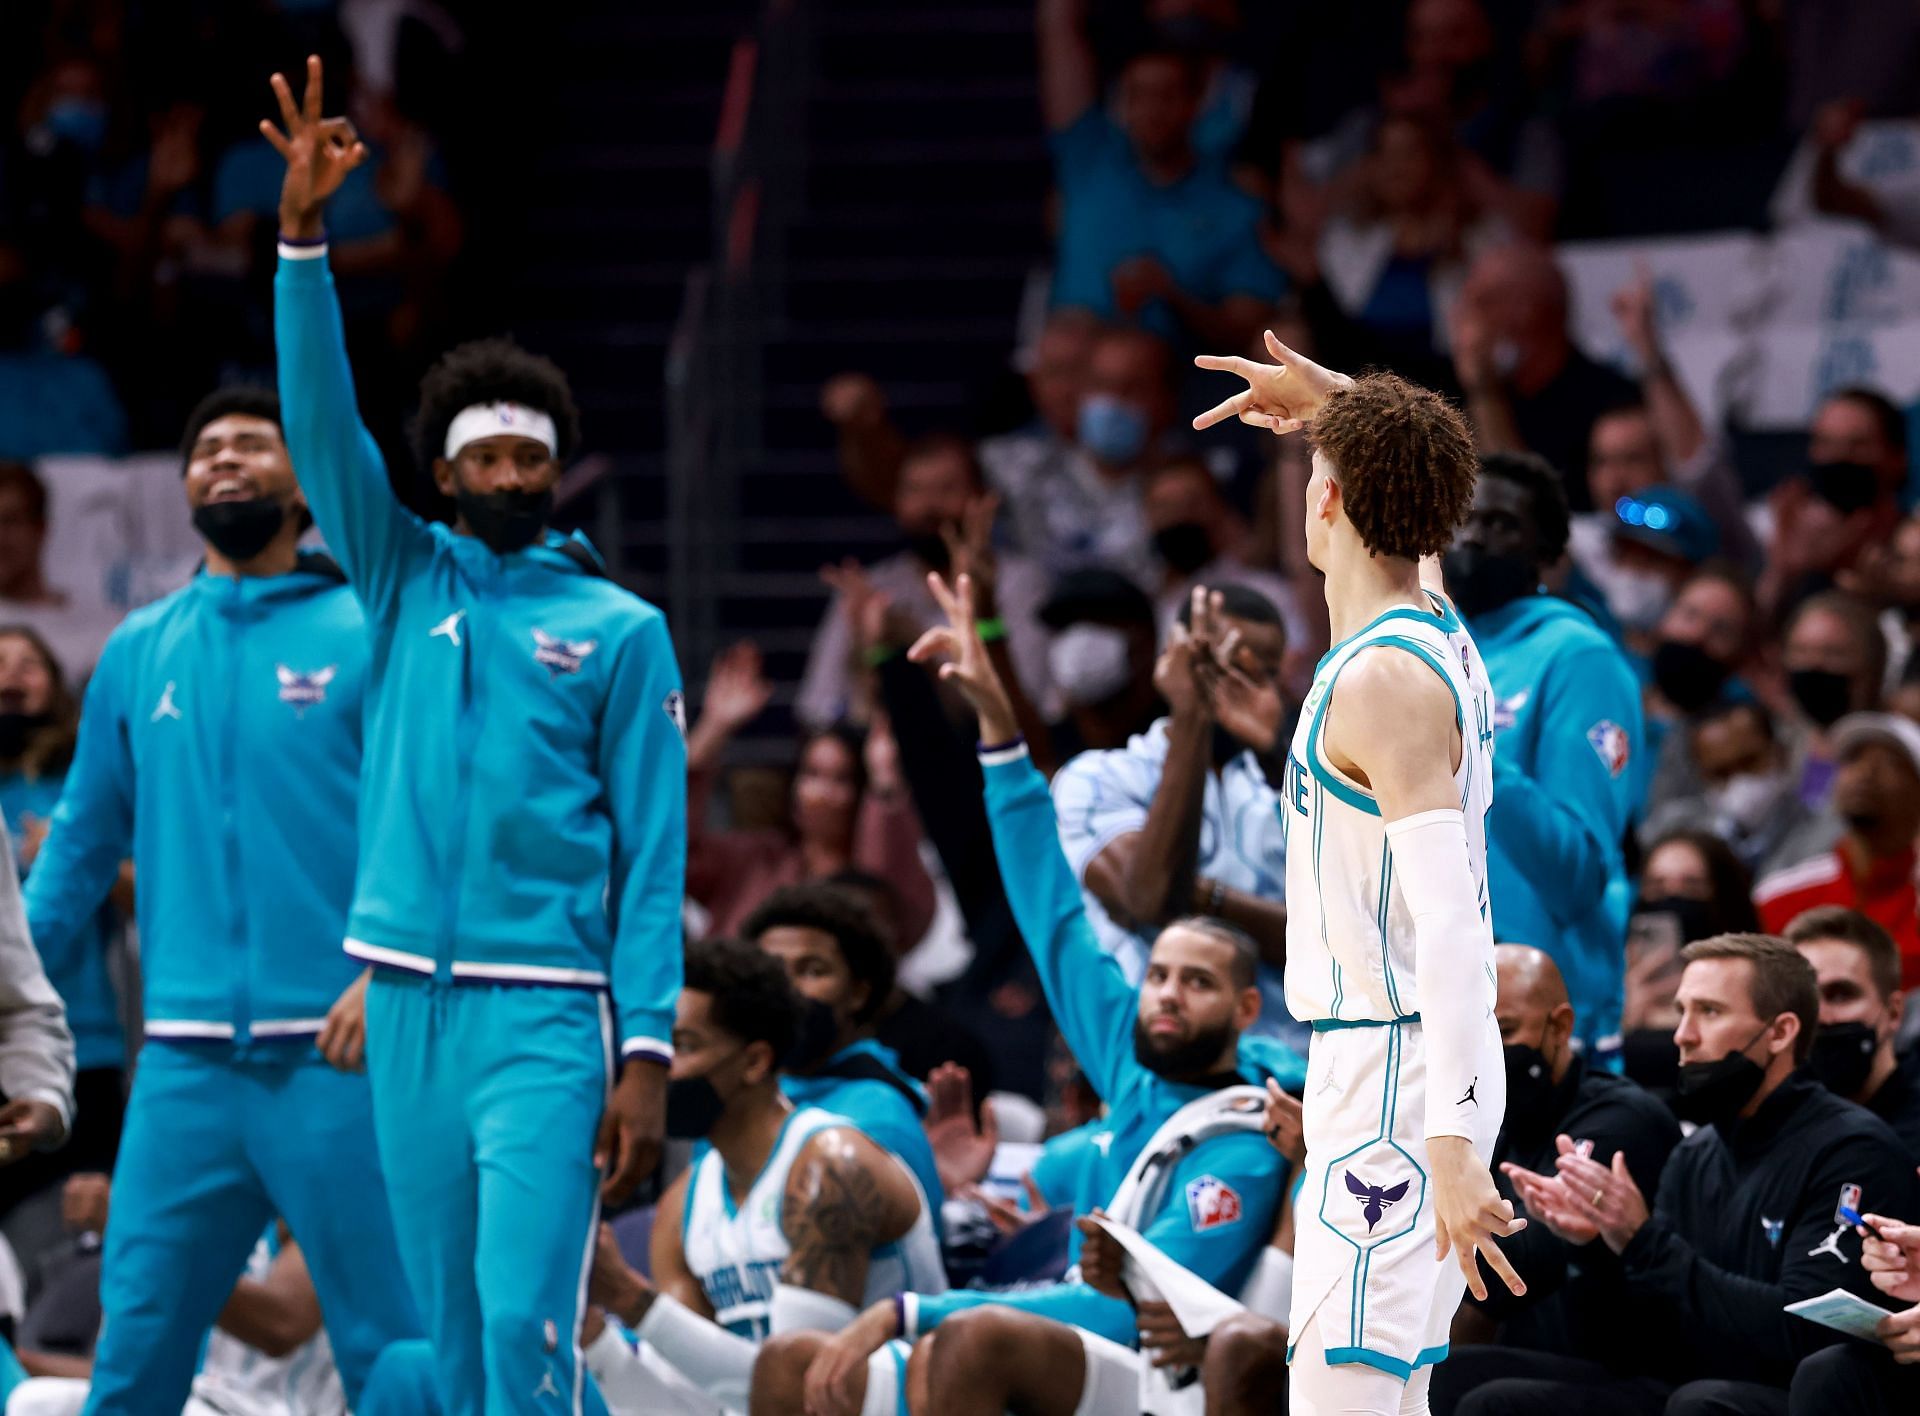 The Charlotte Hornets will count on a young core to end a long playoff drought